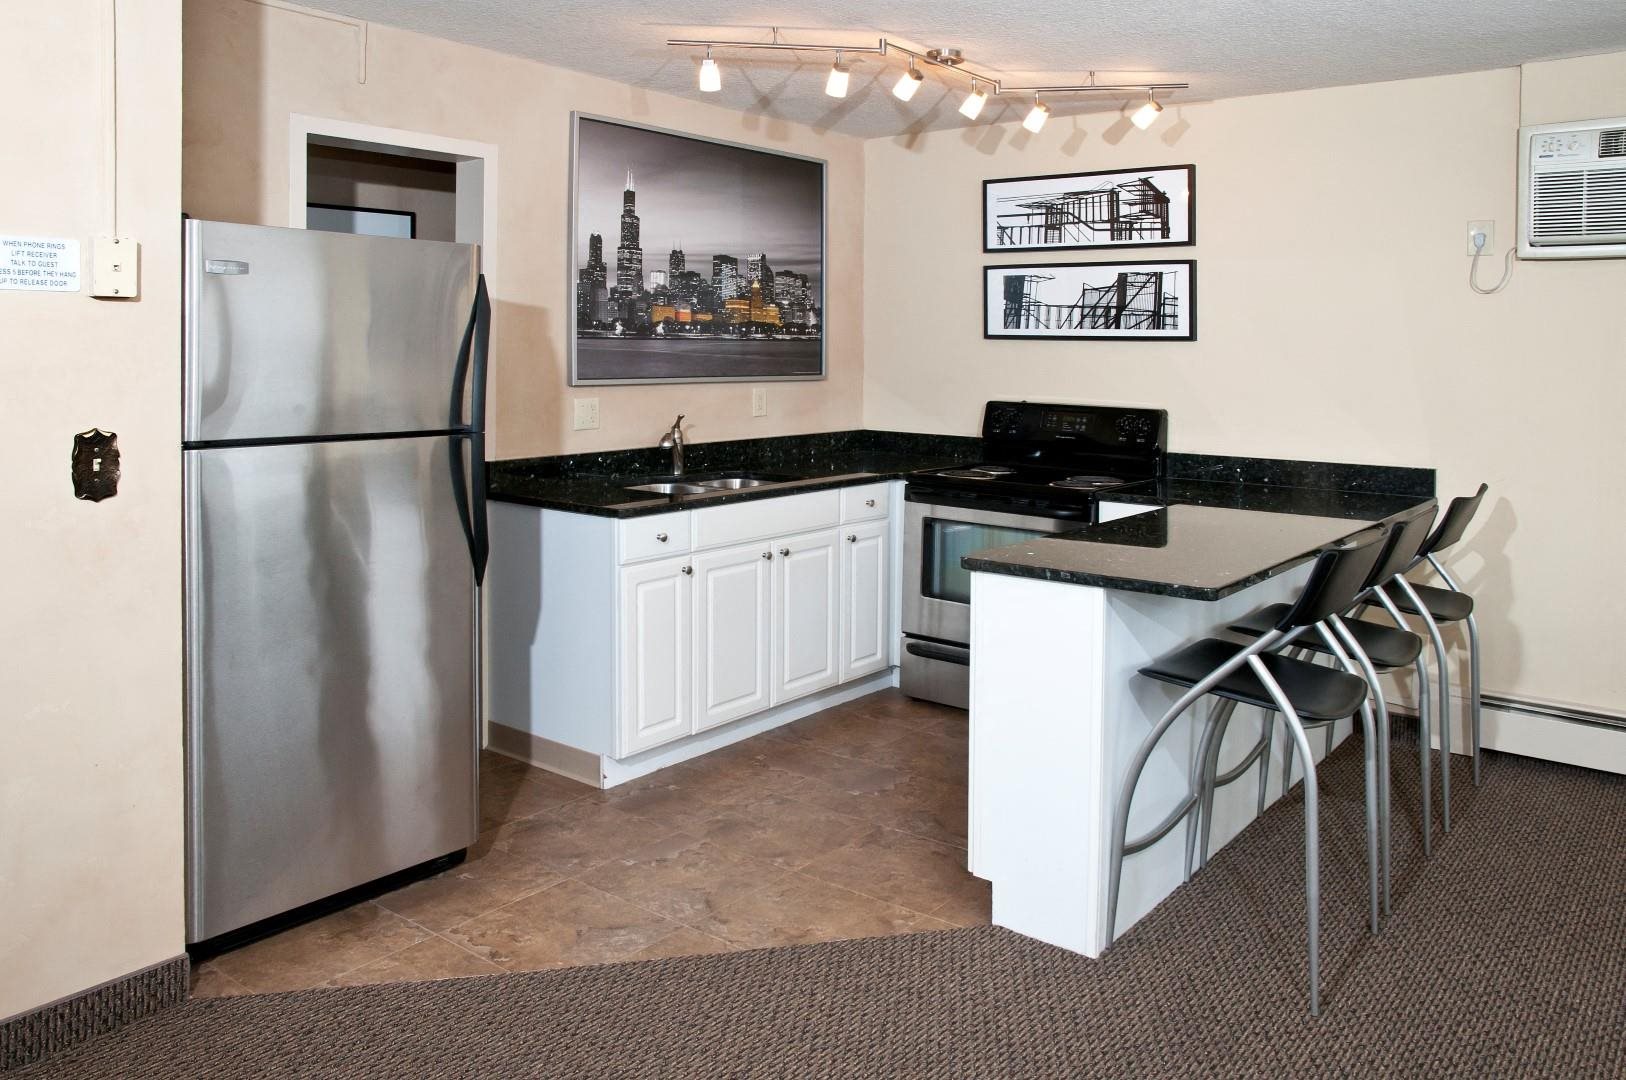 Boulevard 100 Apartments Kitchen with White Cabinetry, Black Counter Tops and Stainless Steal Appliances